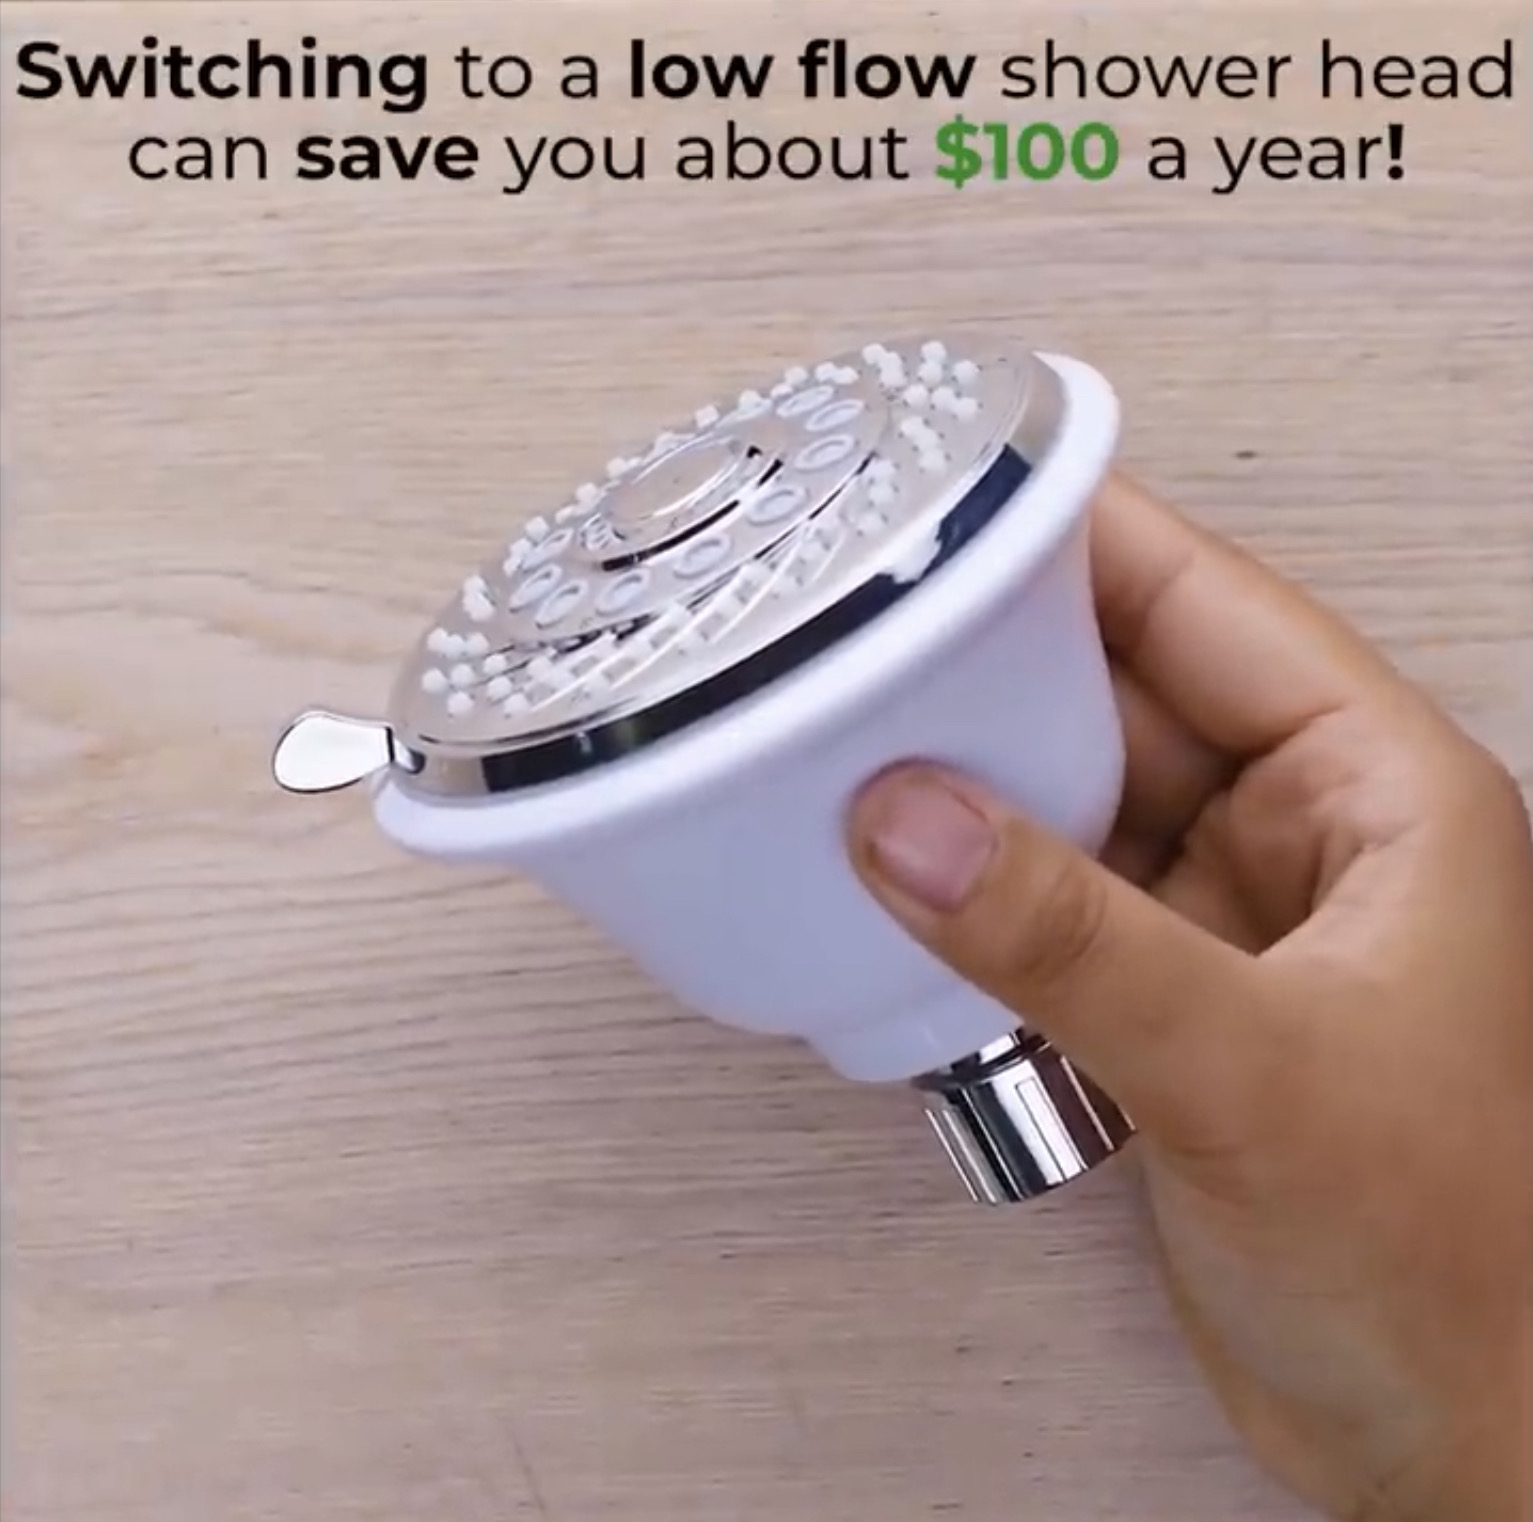 Switching to a low-flow showerhead can save you money in the long run.